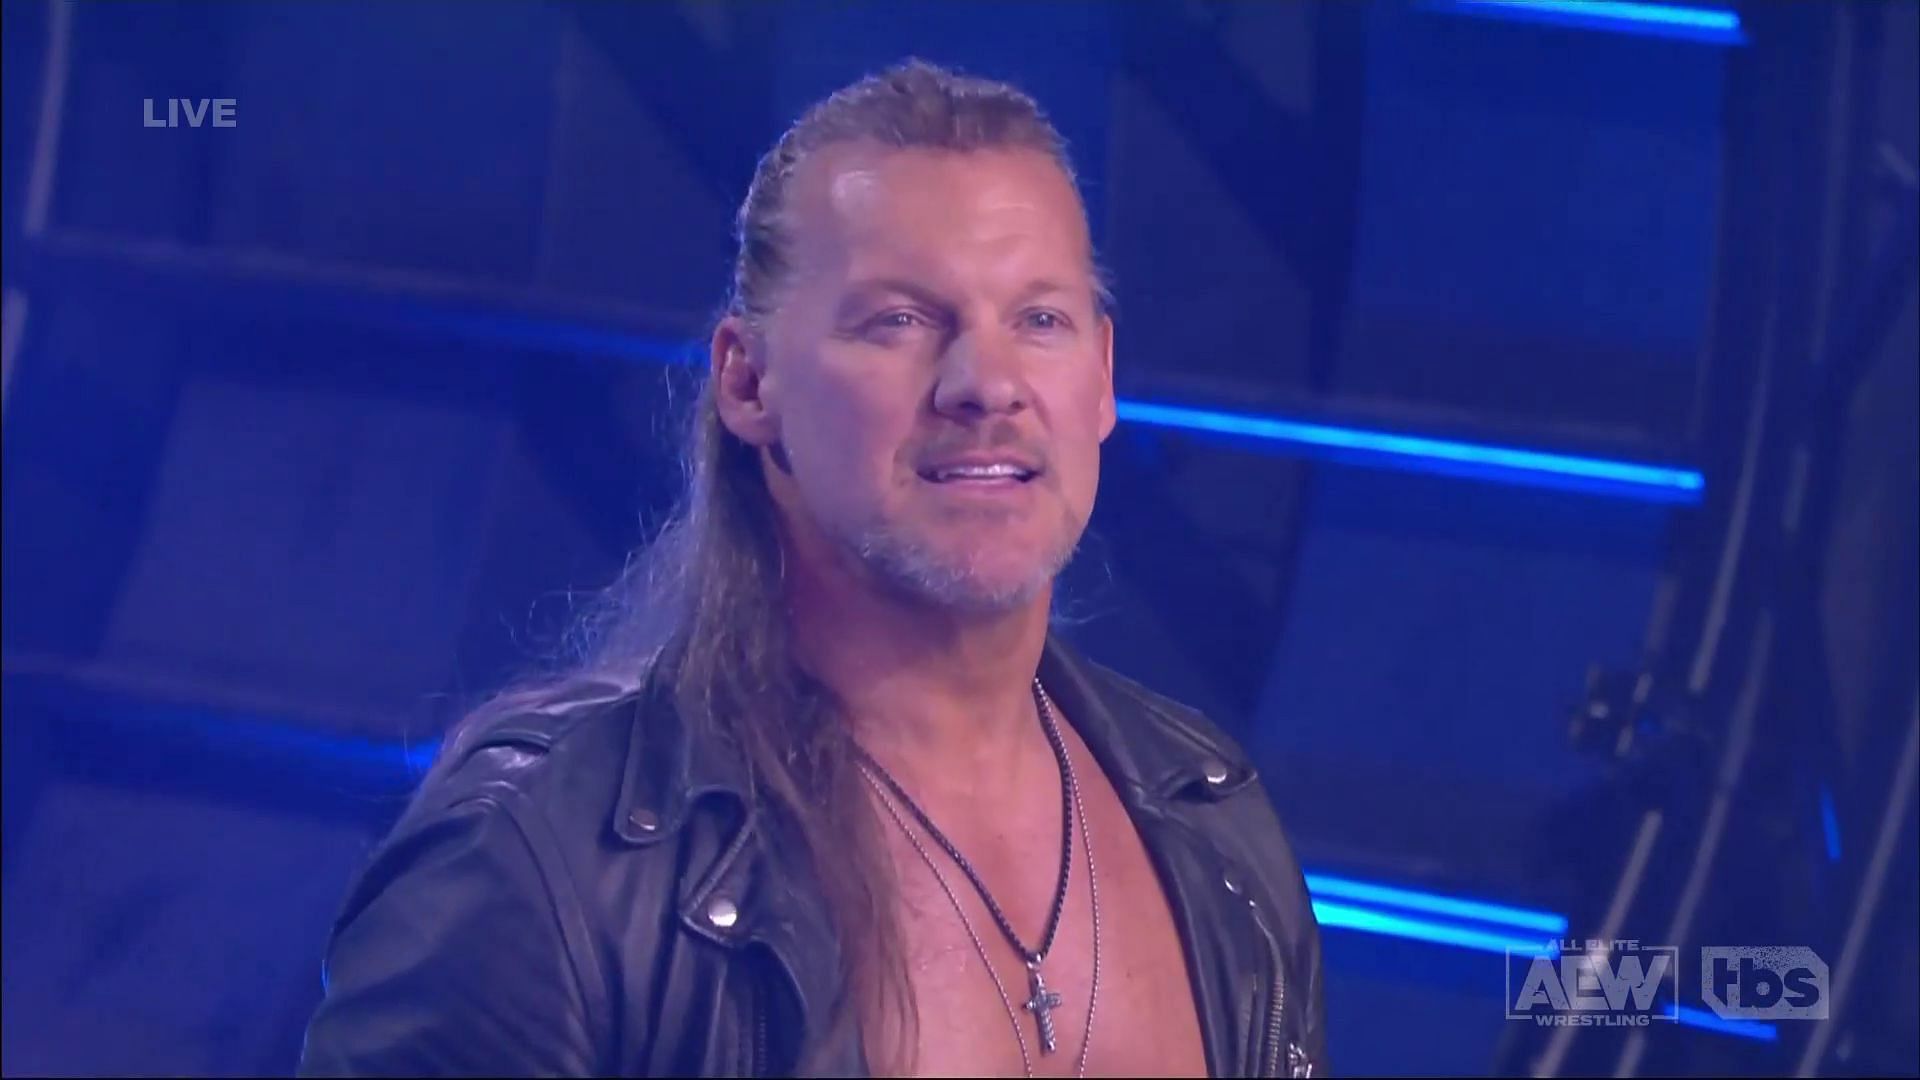 Jericho during the last episode of AEW Dynamite